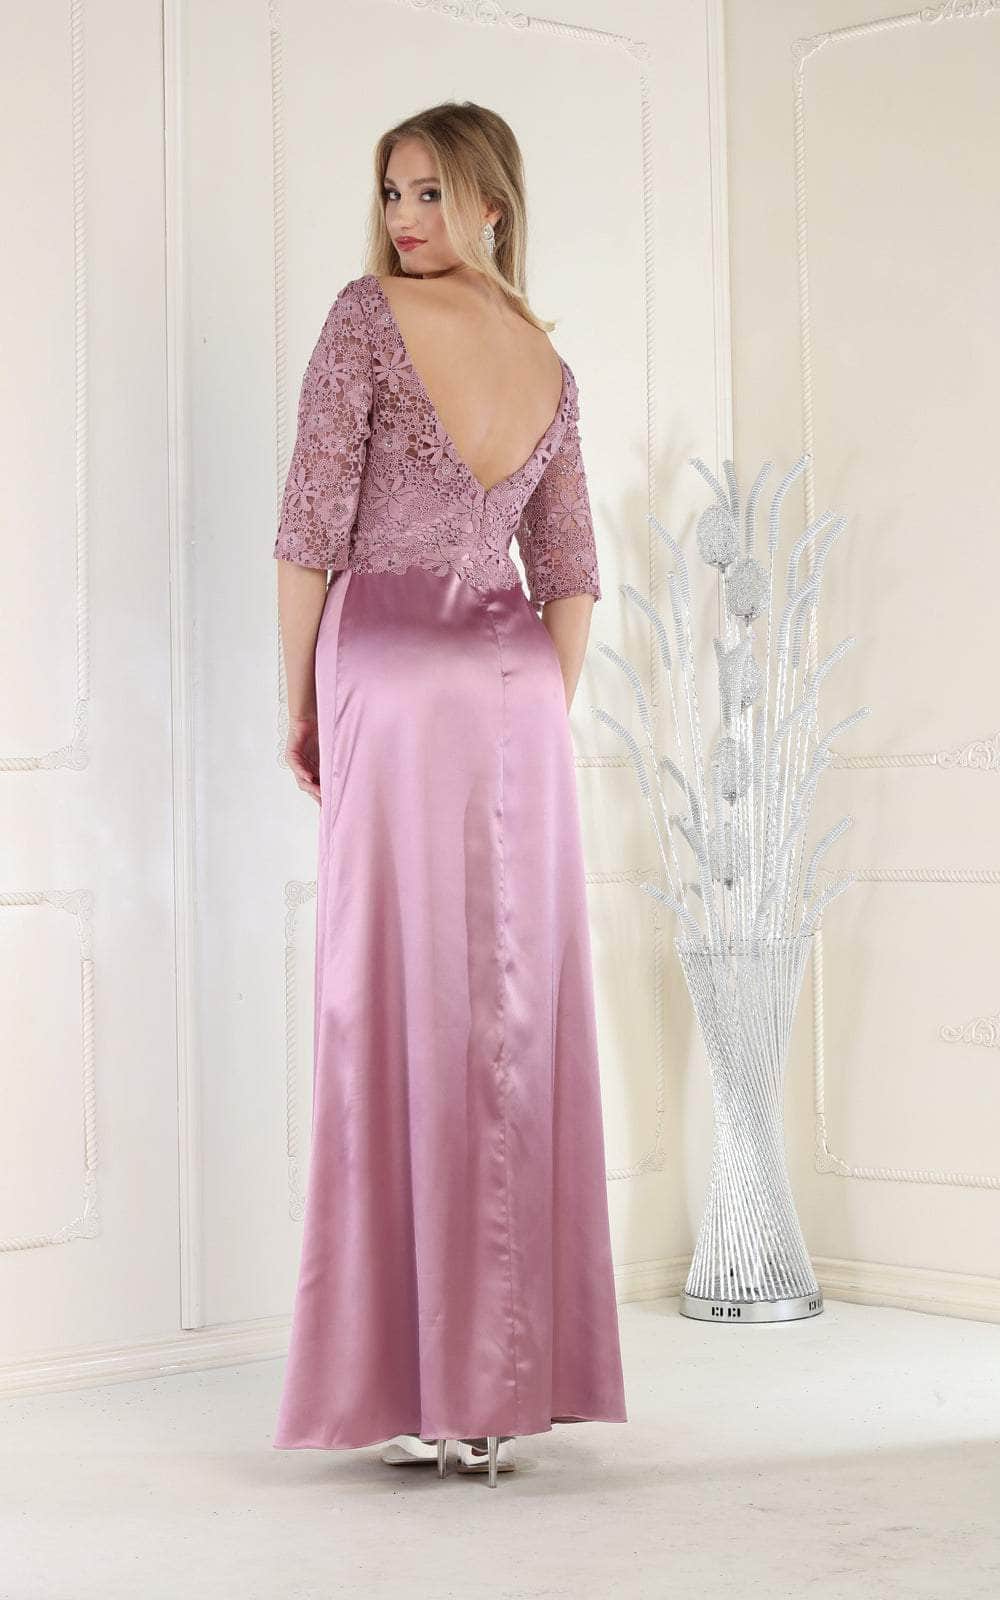 May Queen MQ1969 - Quarter Length Lace Satin Gown Special Occasion Dress